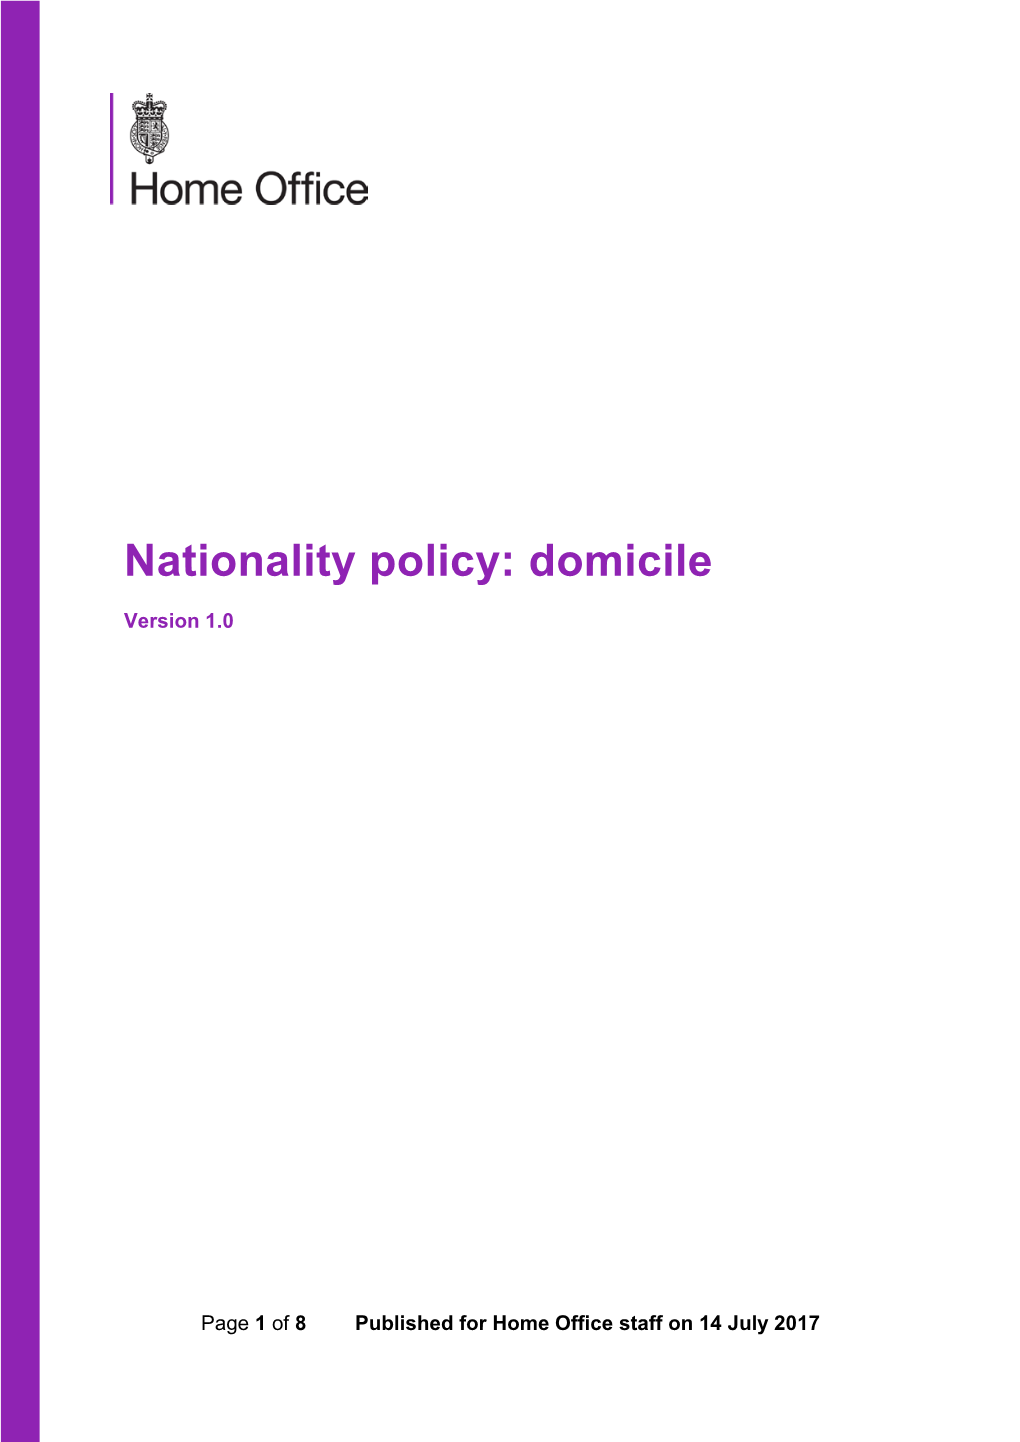 Nationality Policy: Domicile